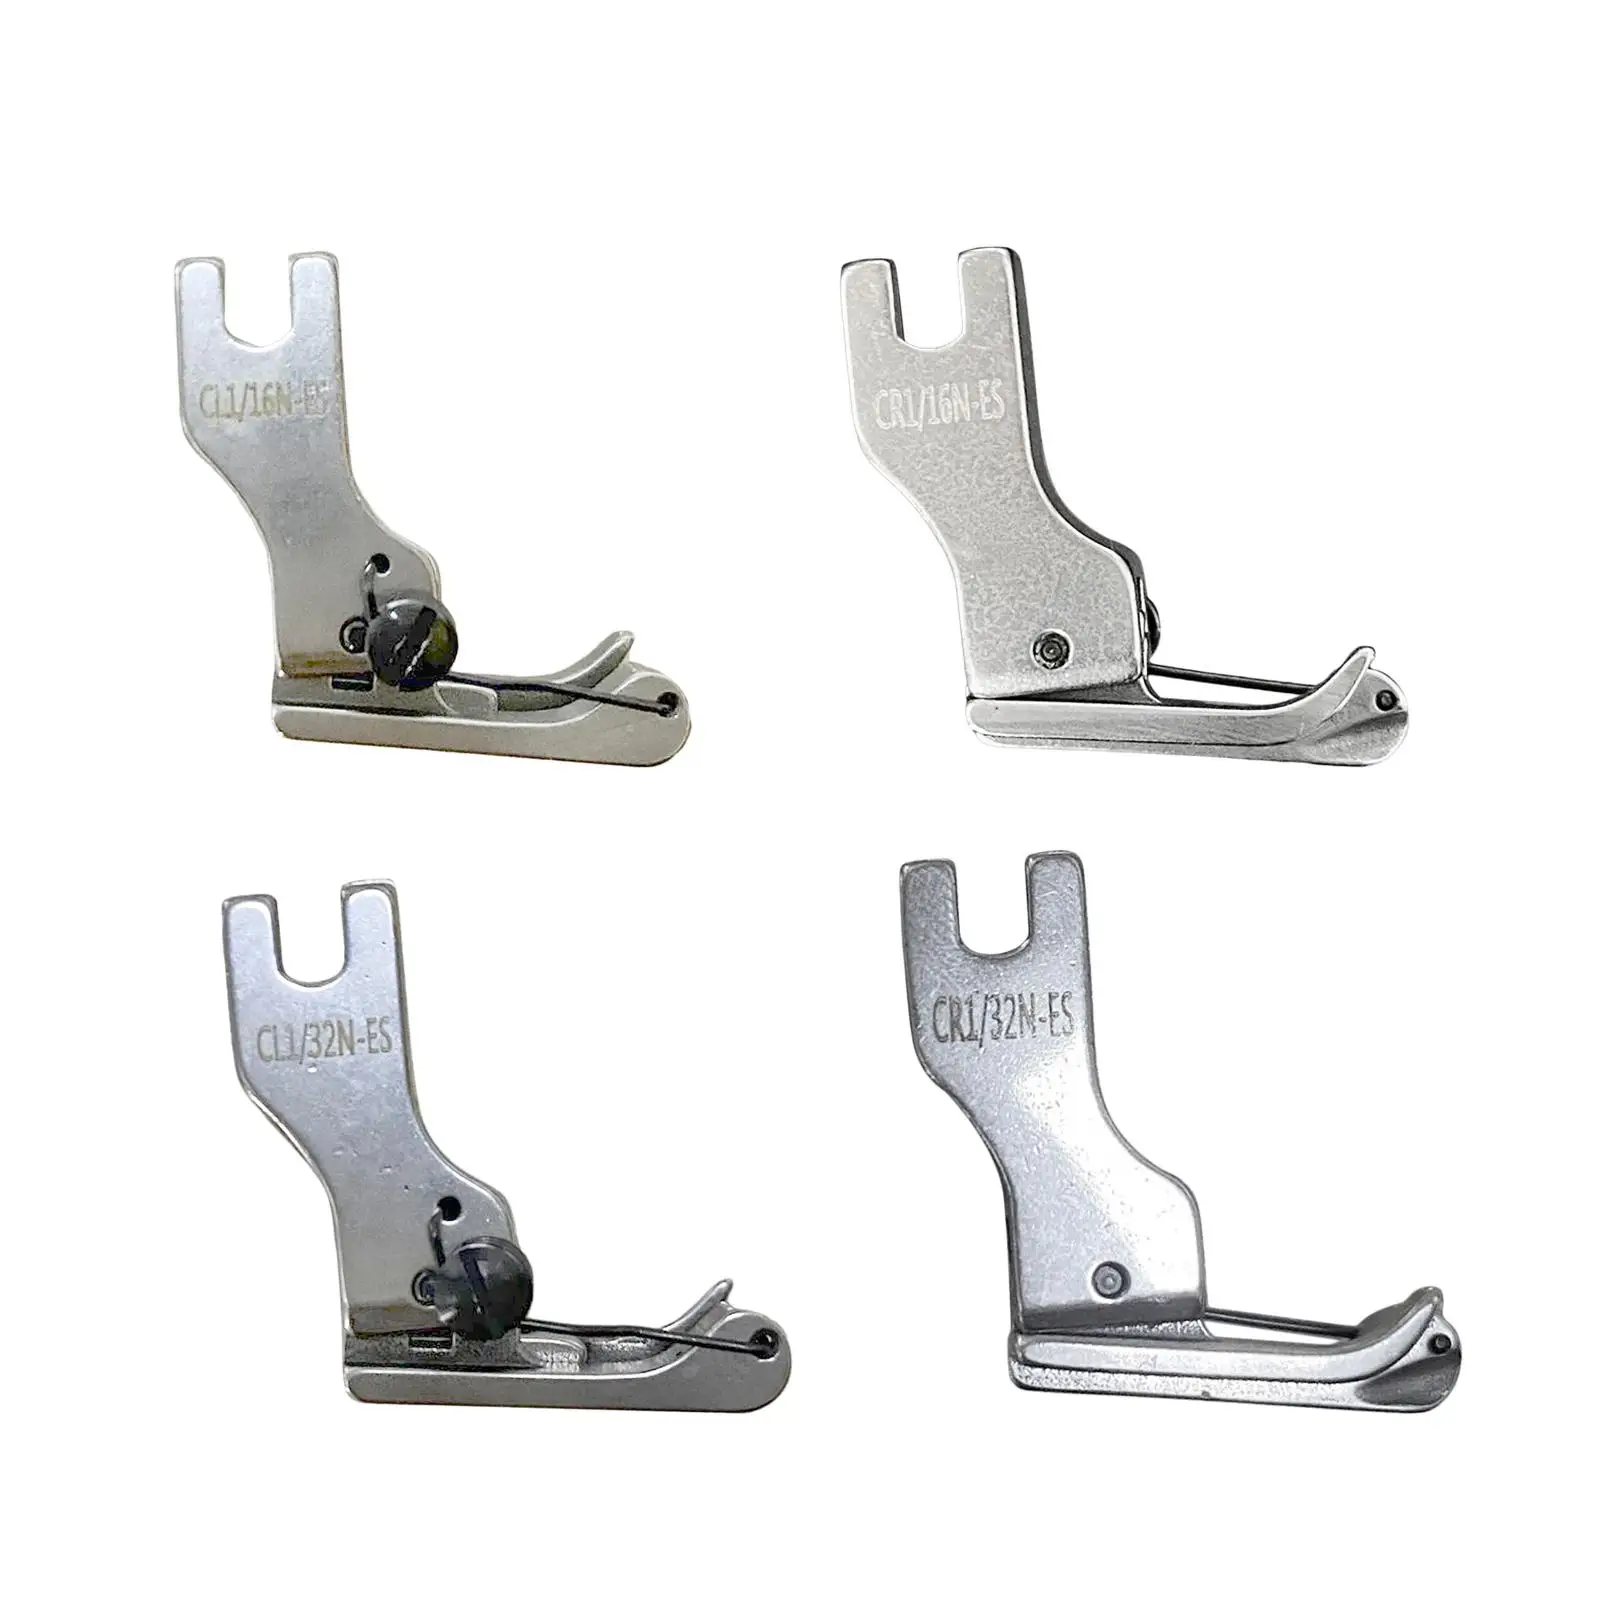 Sewing Machine Presser Foot Sewing Spare Parts Quilting Edge Stitch Foot Adult Multifunction Fabric Auxiliary Presser Foot